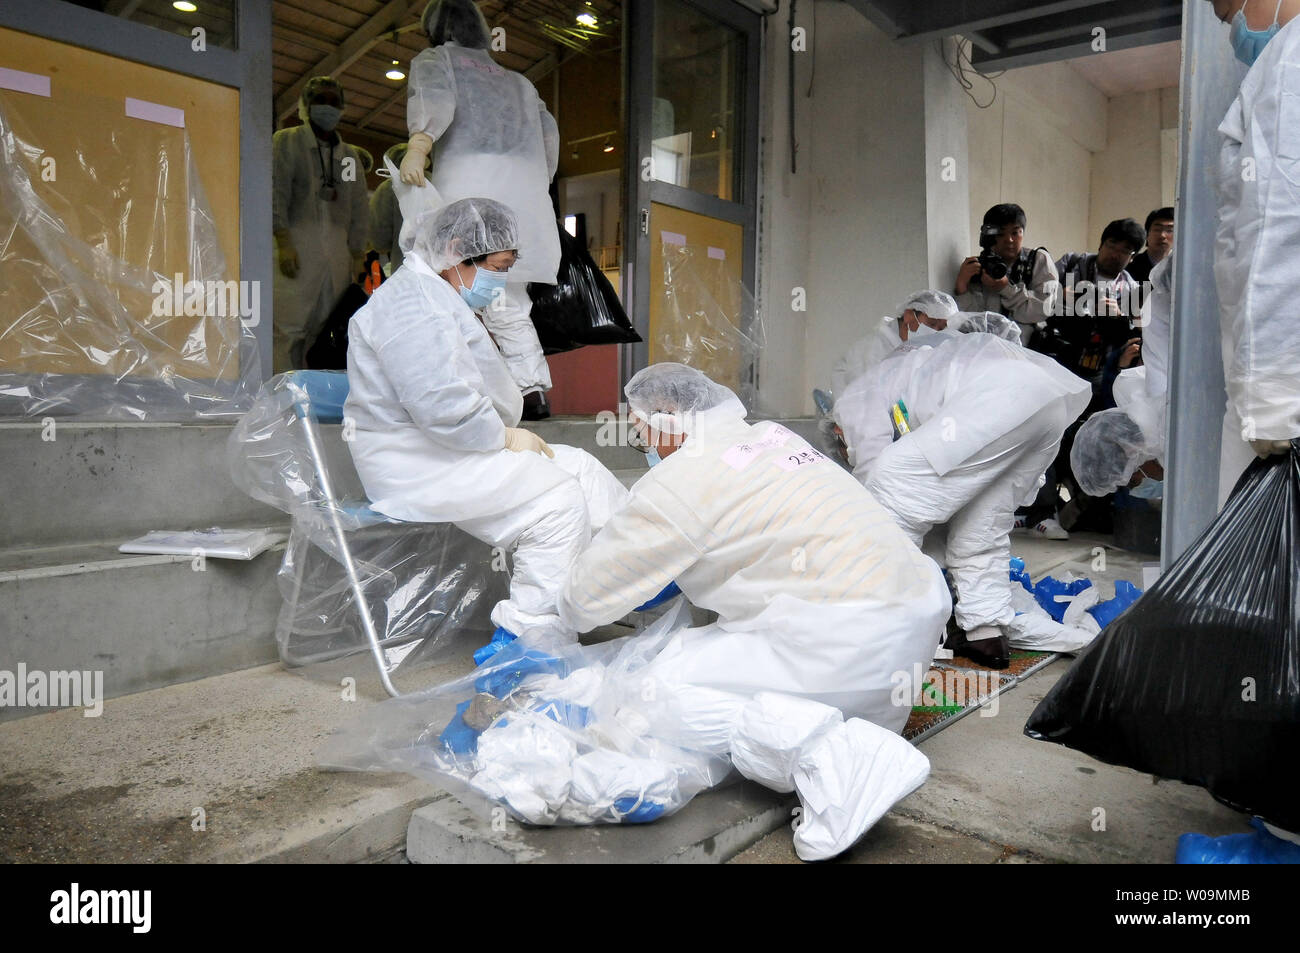 Evacuees take off cover for shoes after returning from a brief visit back to their homes  inside the restricted zone of a 20 km radius from the Fukushima Daiichi Nuclear Power Plant at the Furumichi gymnasium in Tamura, Fukushima prefecture, Japan, May 22, 2011.     UPI/Keizo Mori Stock Photo